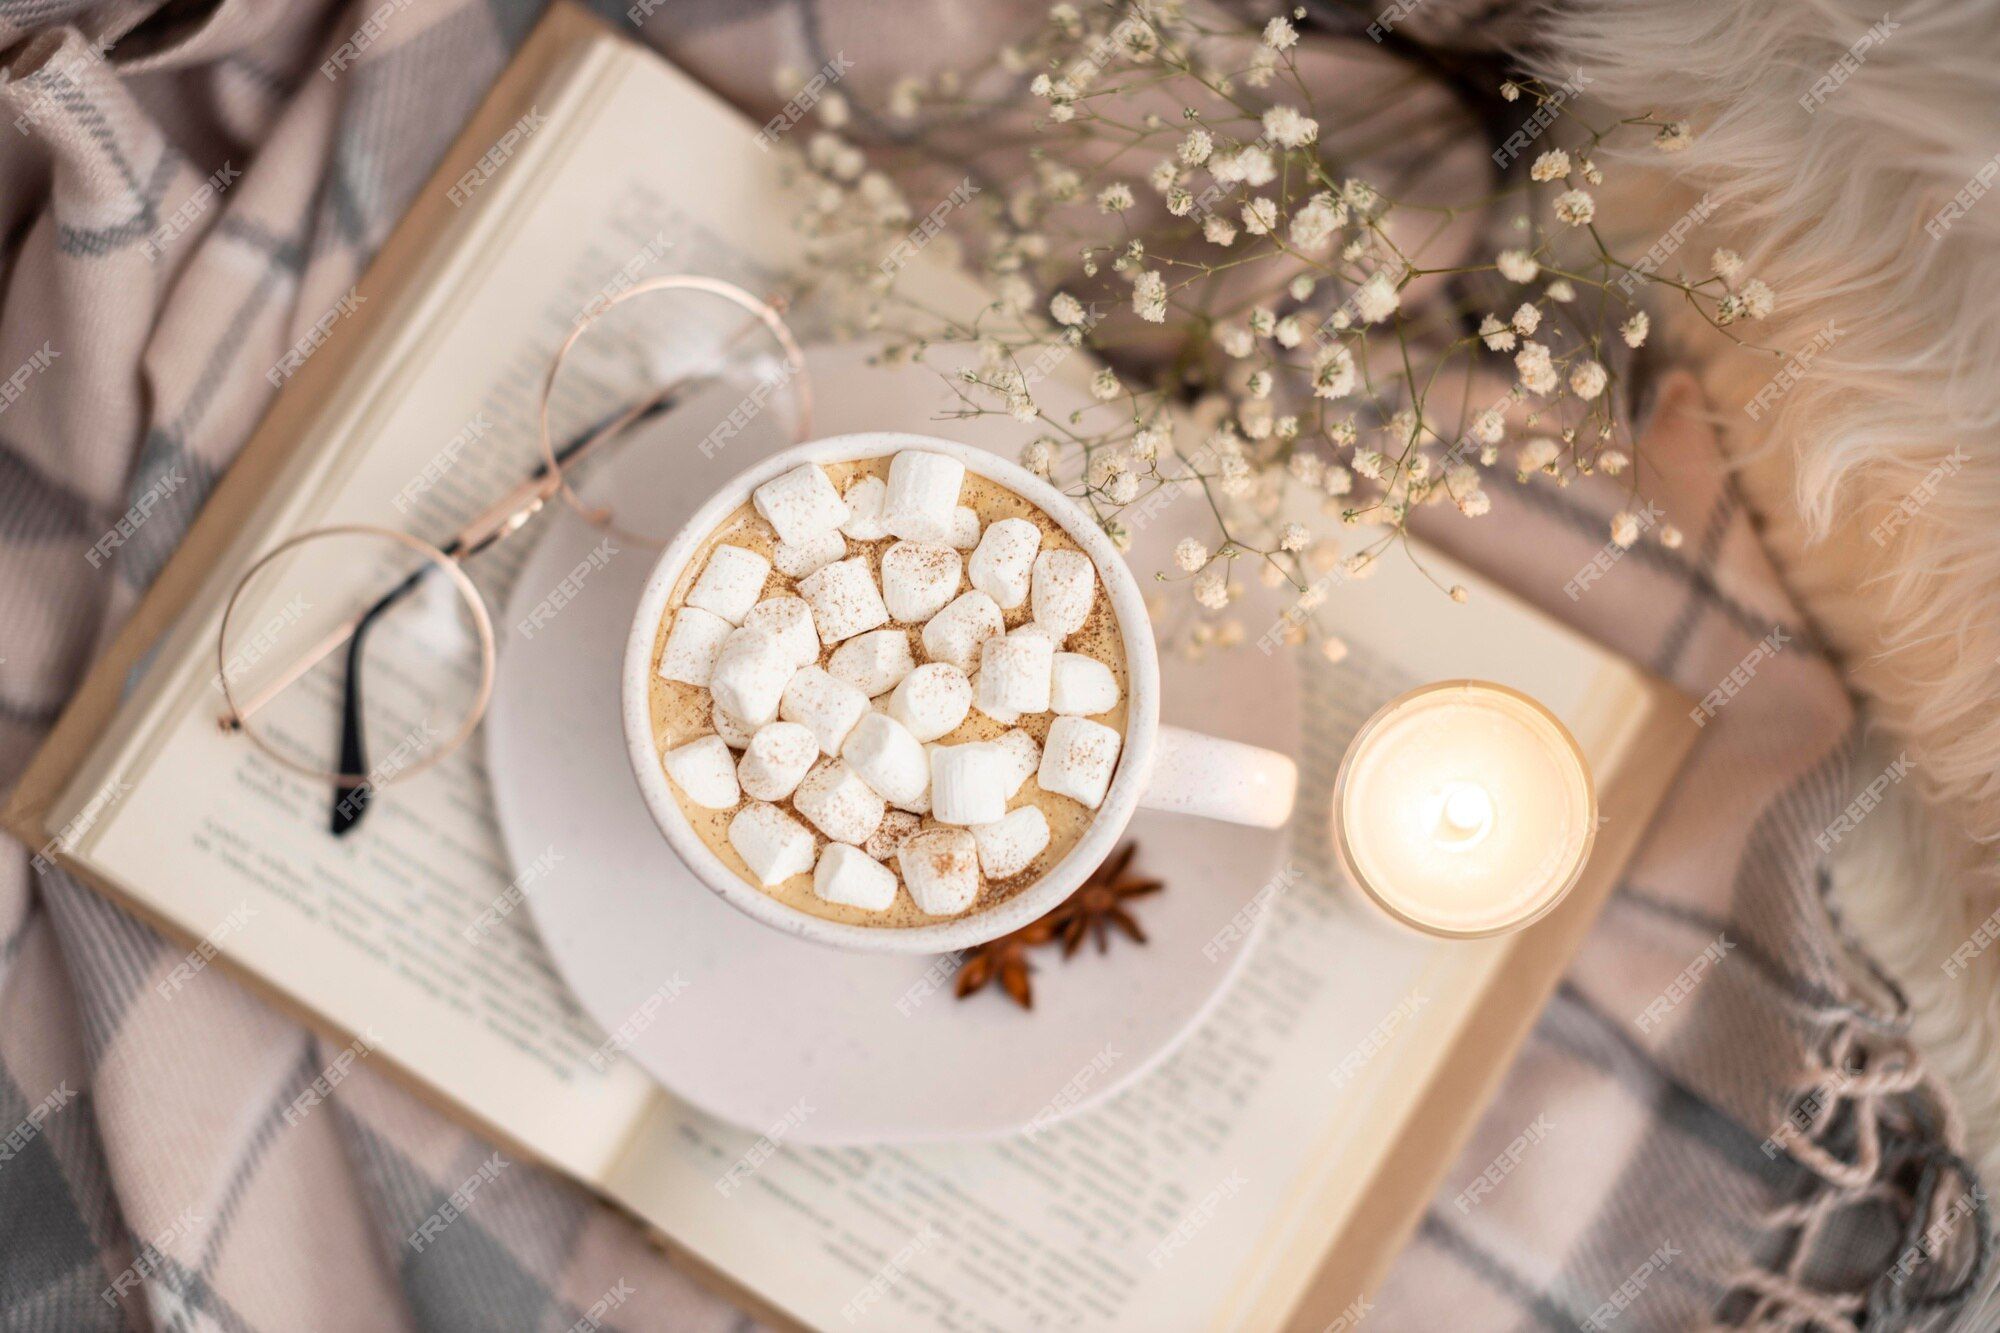 A cup of hot chocolate with marshmallows on top, a book, a candle and glasses on a blanket. - Marshmallows